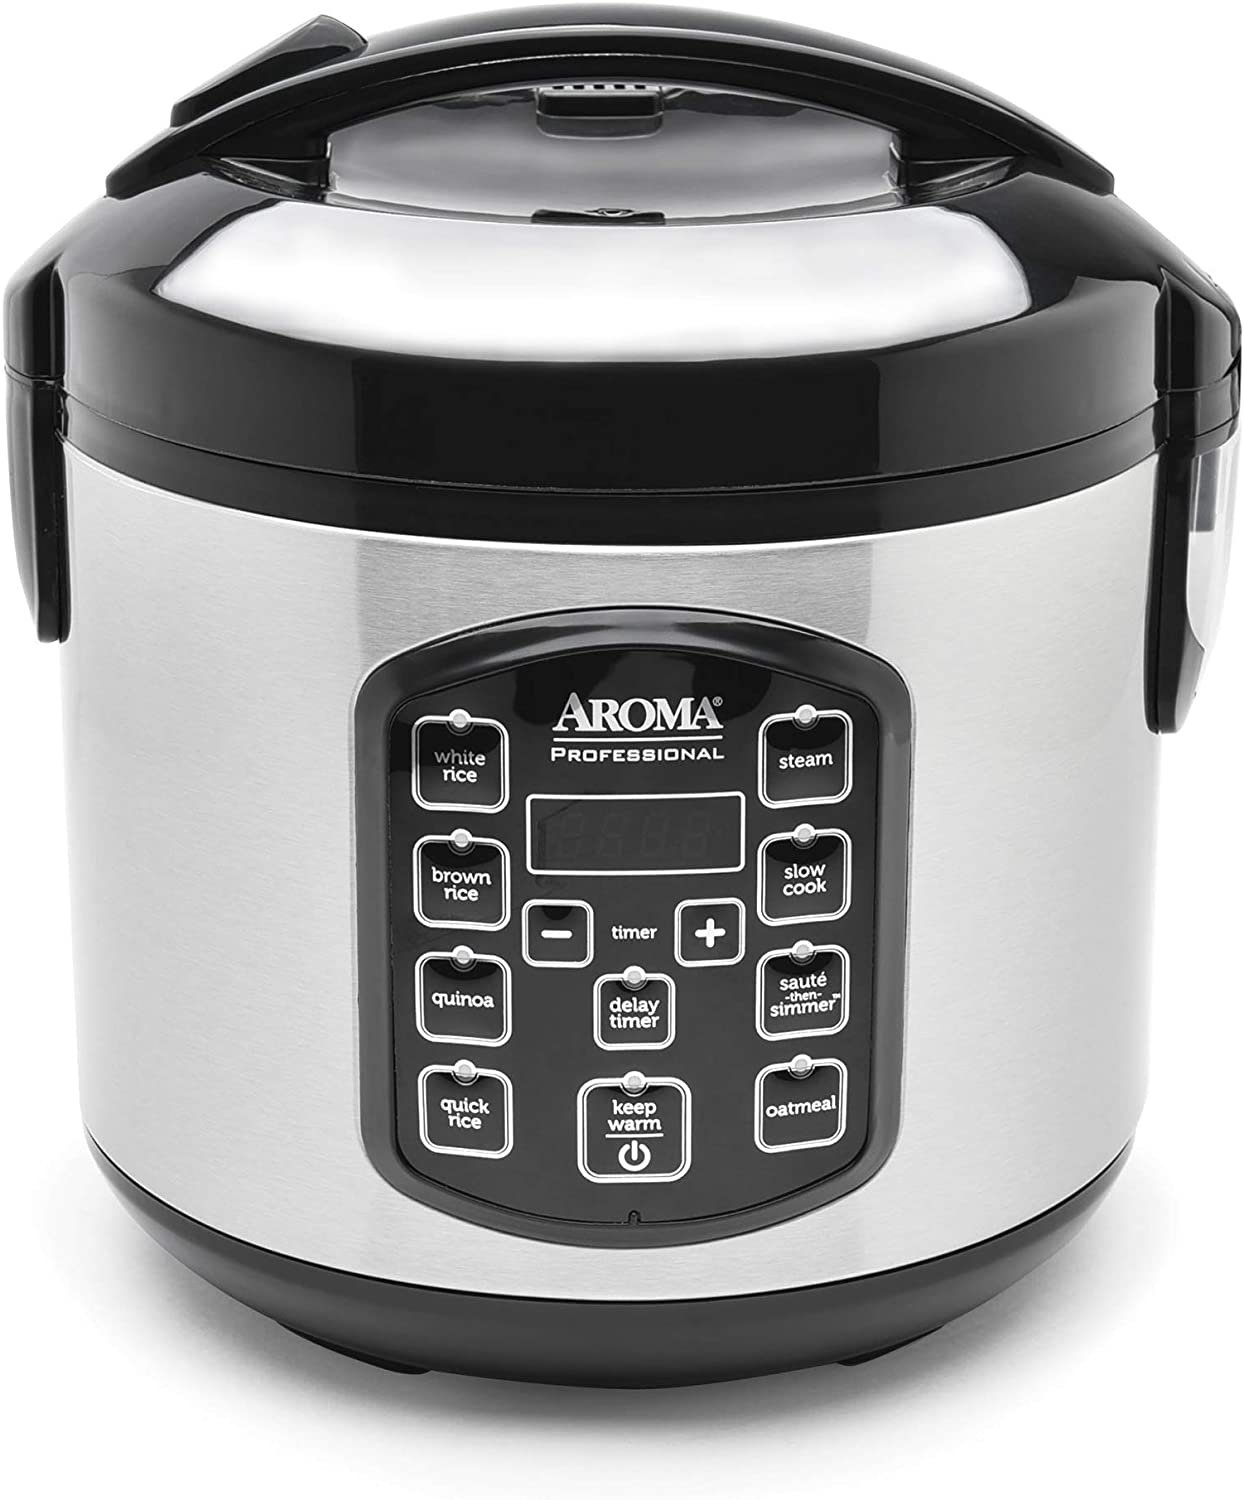 The Best Rice Cookers | The Smart Slow Cooker